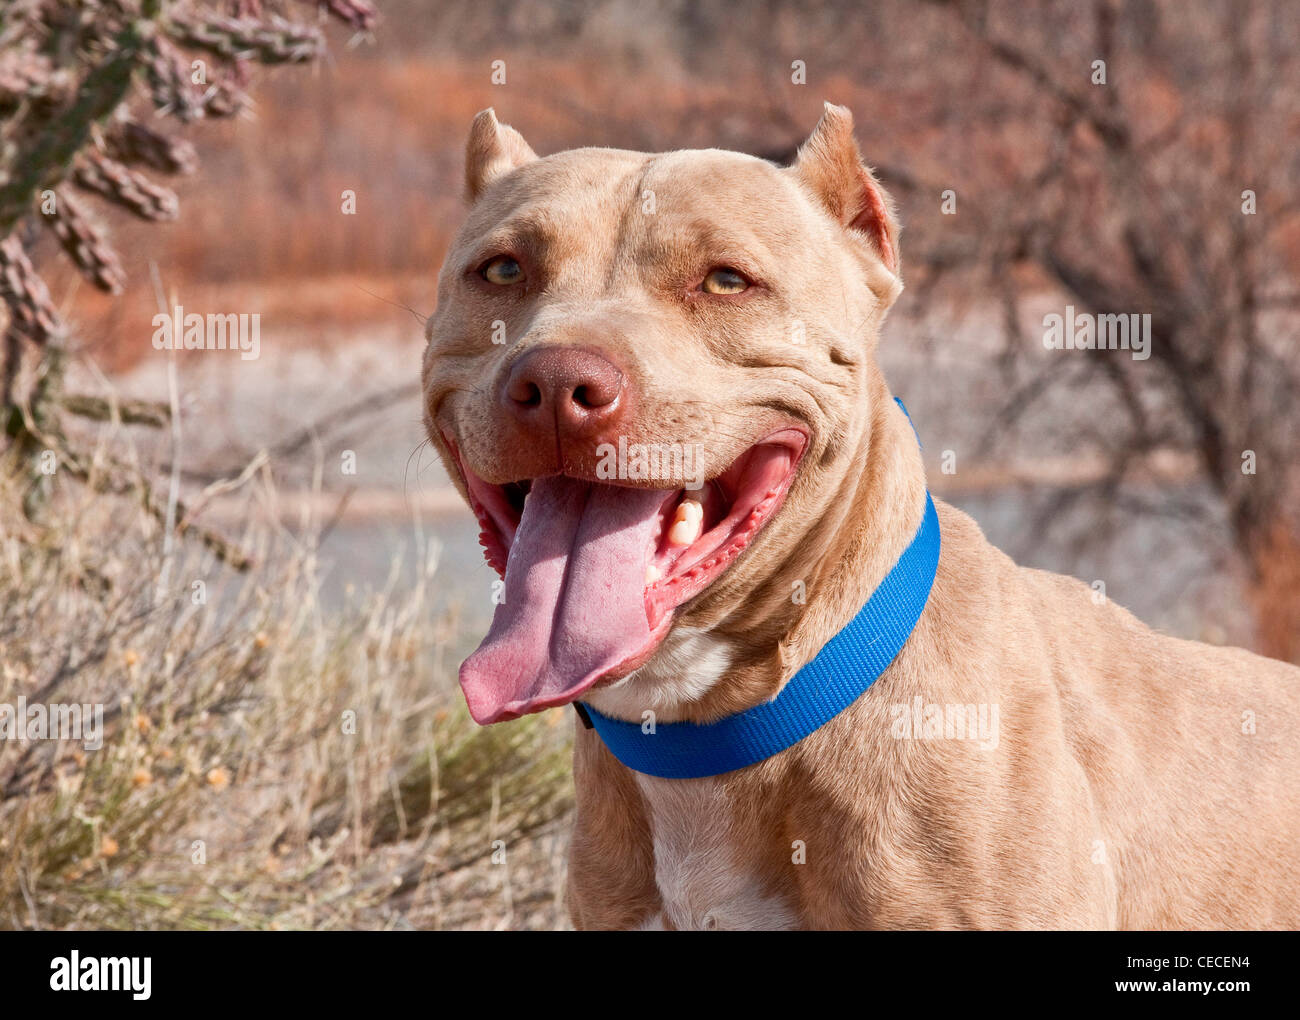 An American Pitt Bull Terrier dog standing with blue collar on smiling Stock Photo